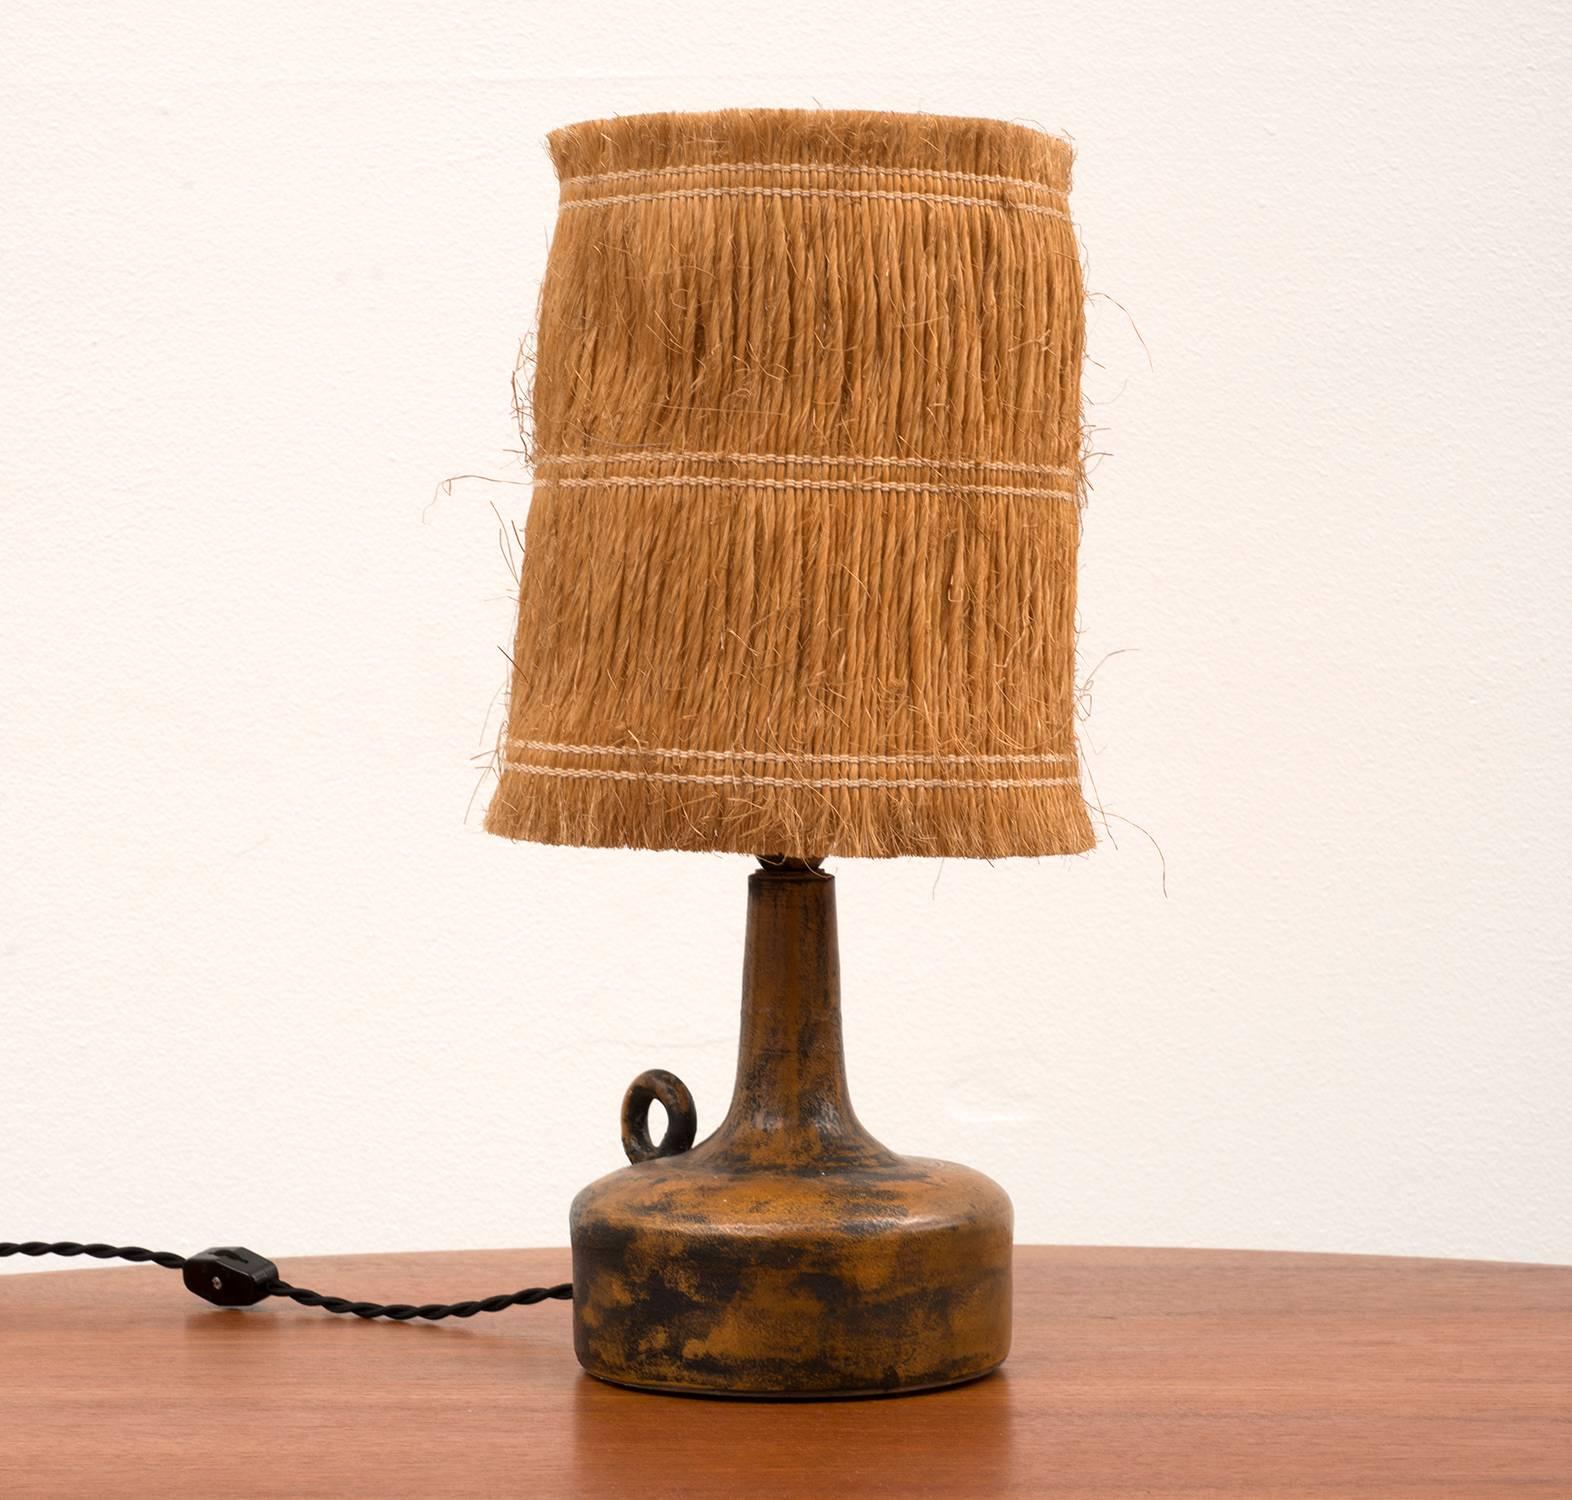 Stunning little lamp in ceramic with rust and black sgraffito glaze by Jacques Blin. With original raffia shade, signed 